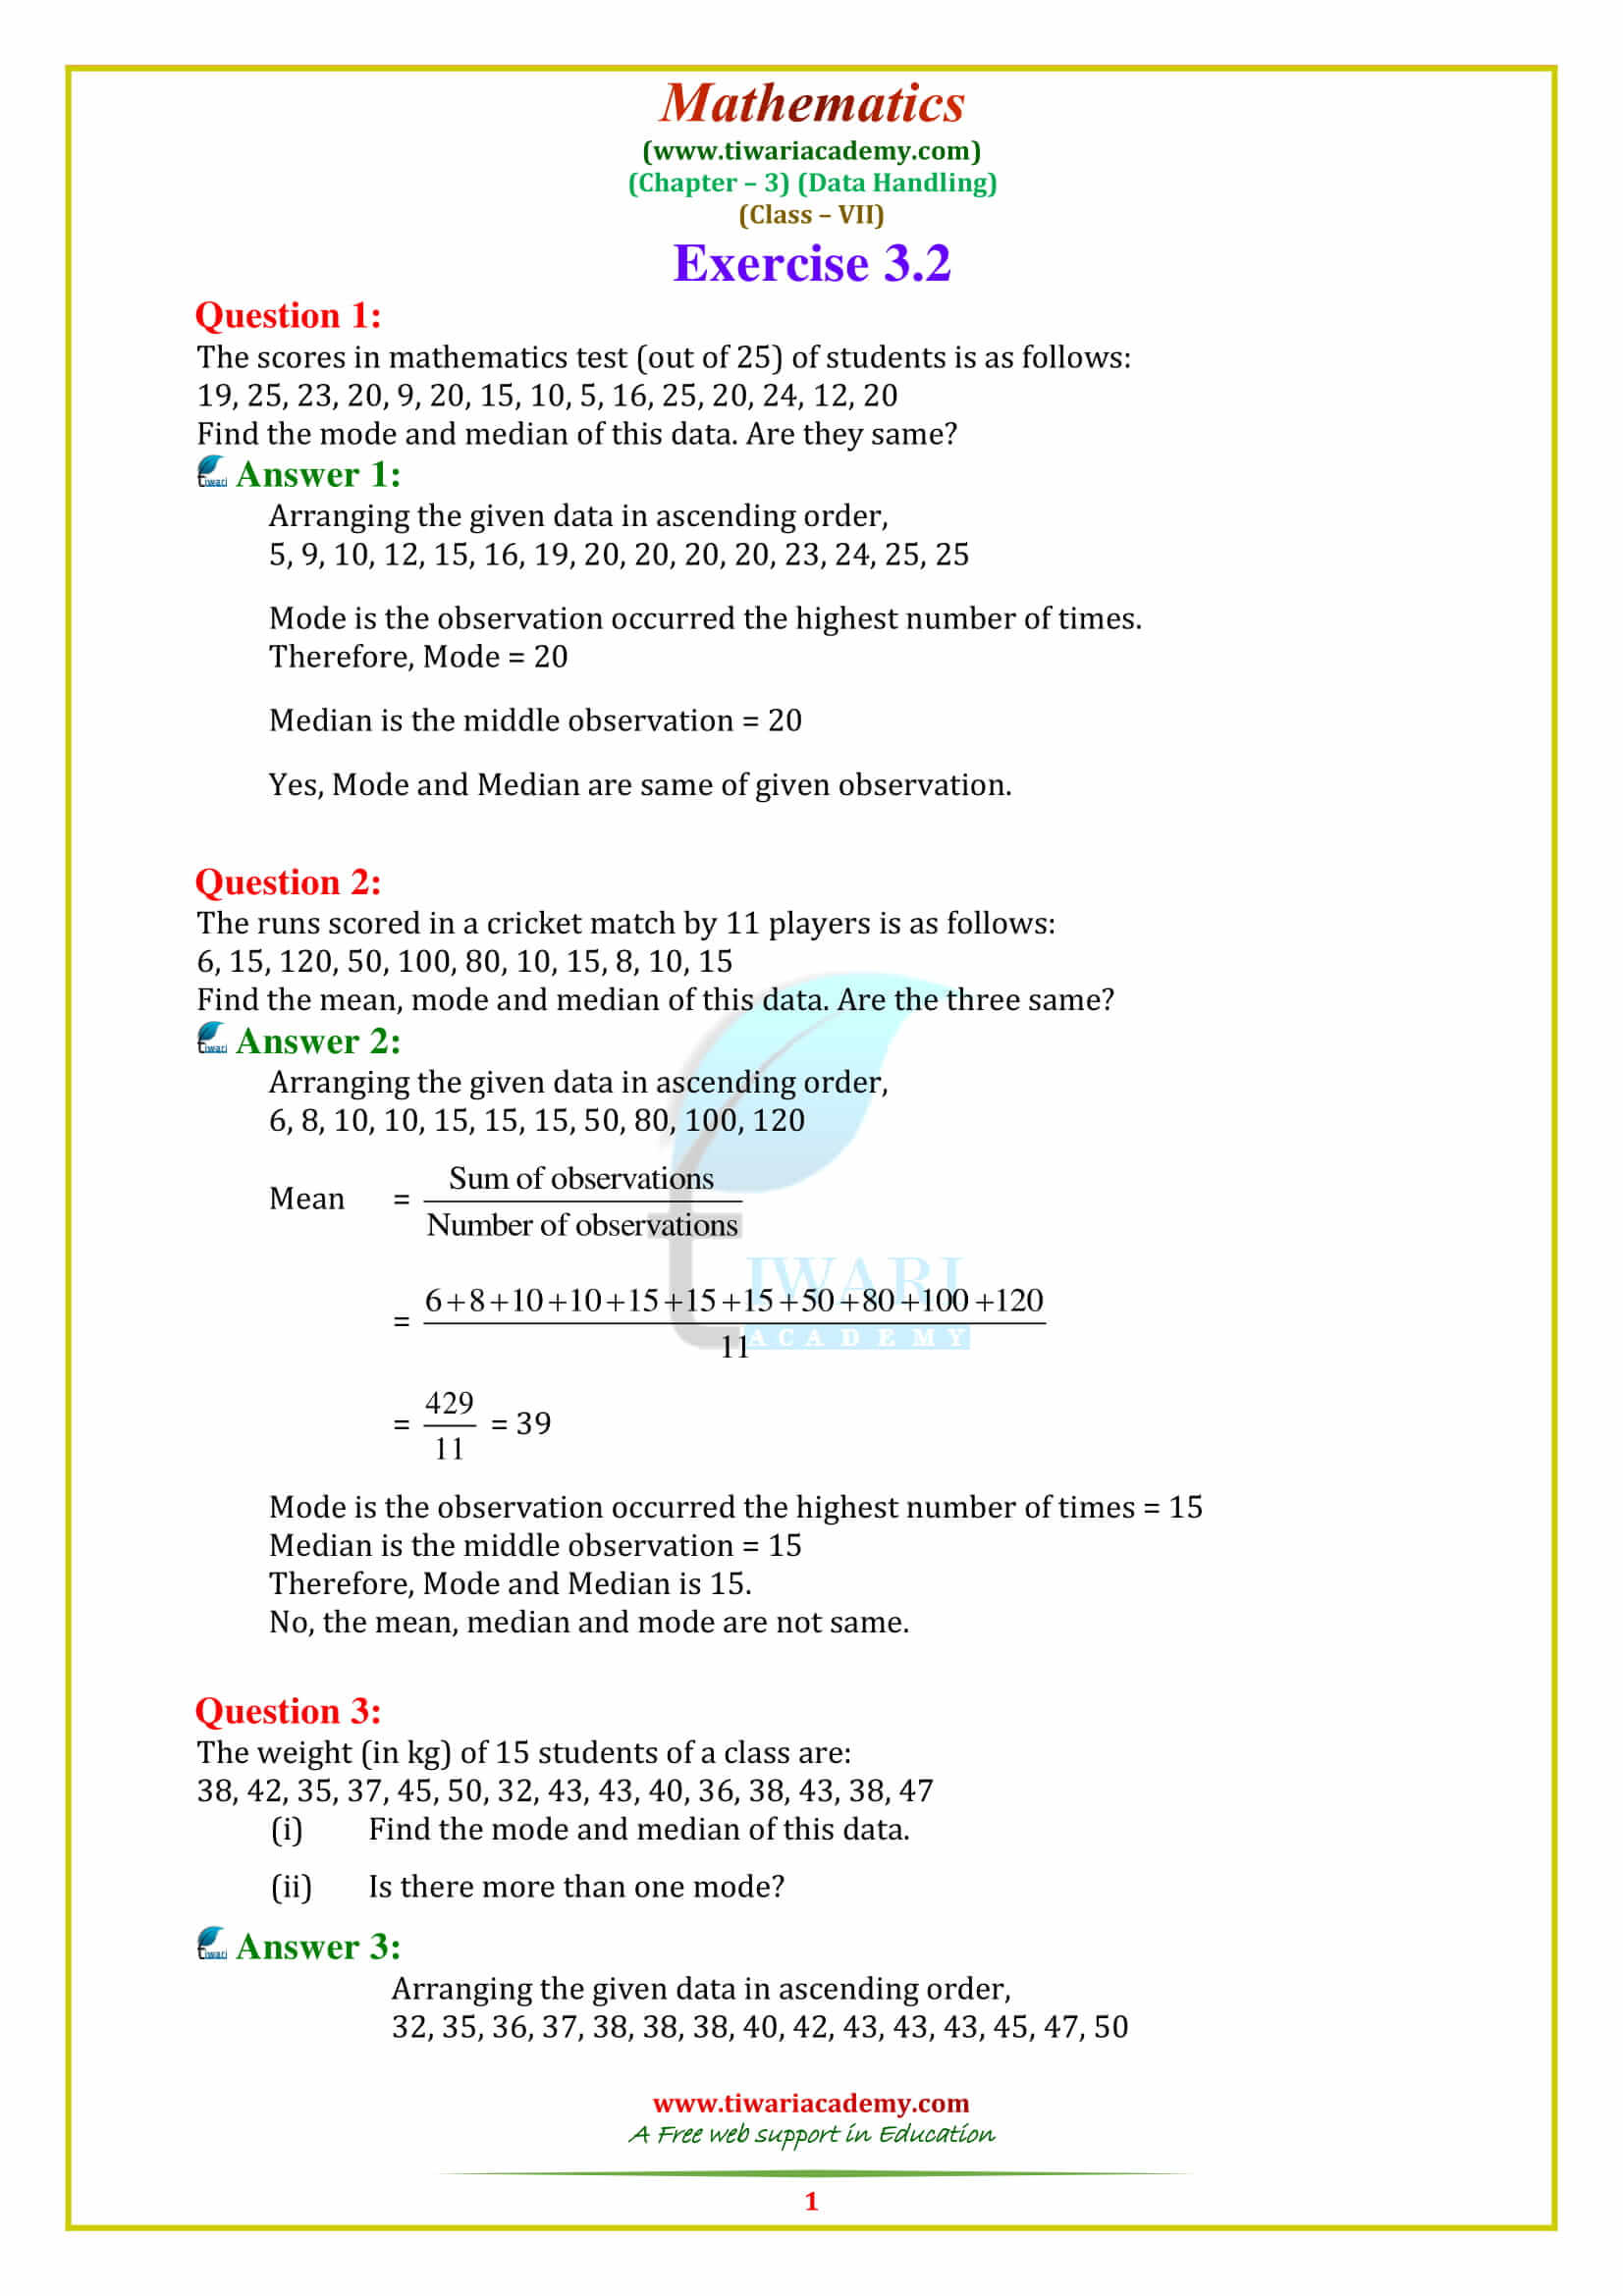 NCERT Solutions for Class 7 Maths Chapter 3 Exercise 3.2